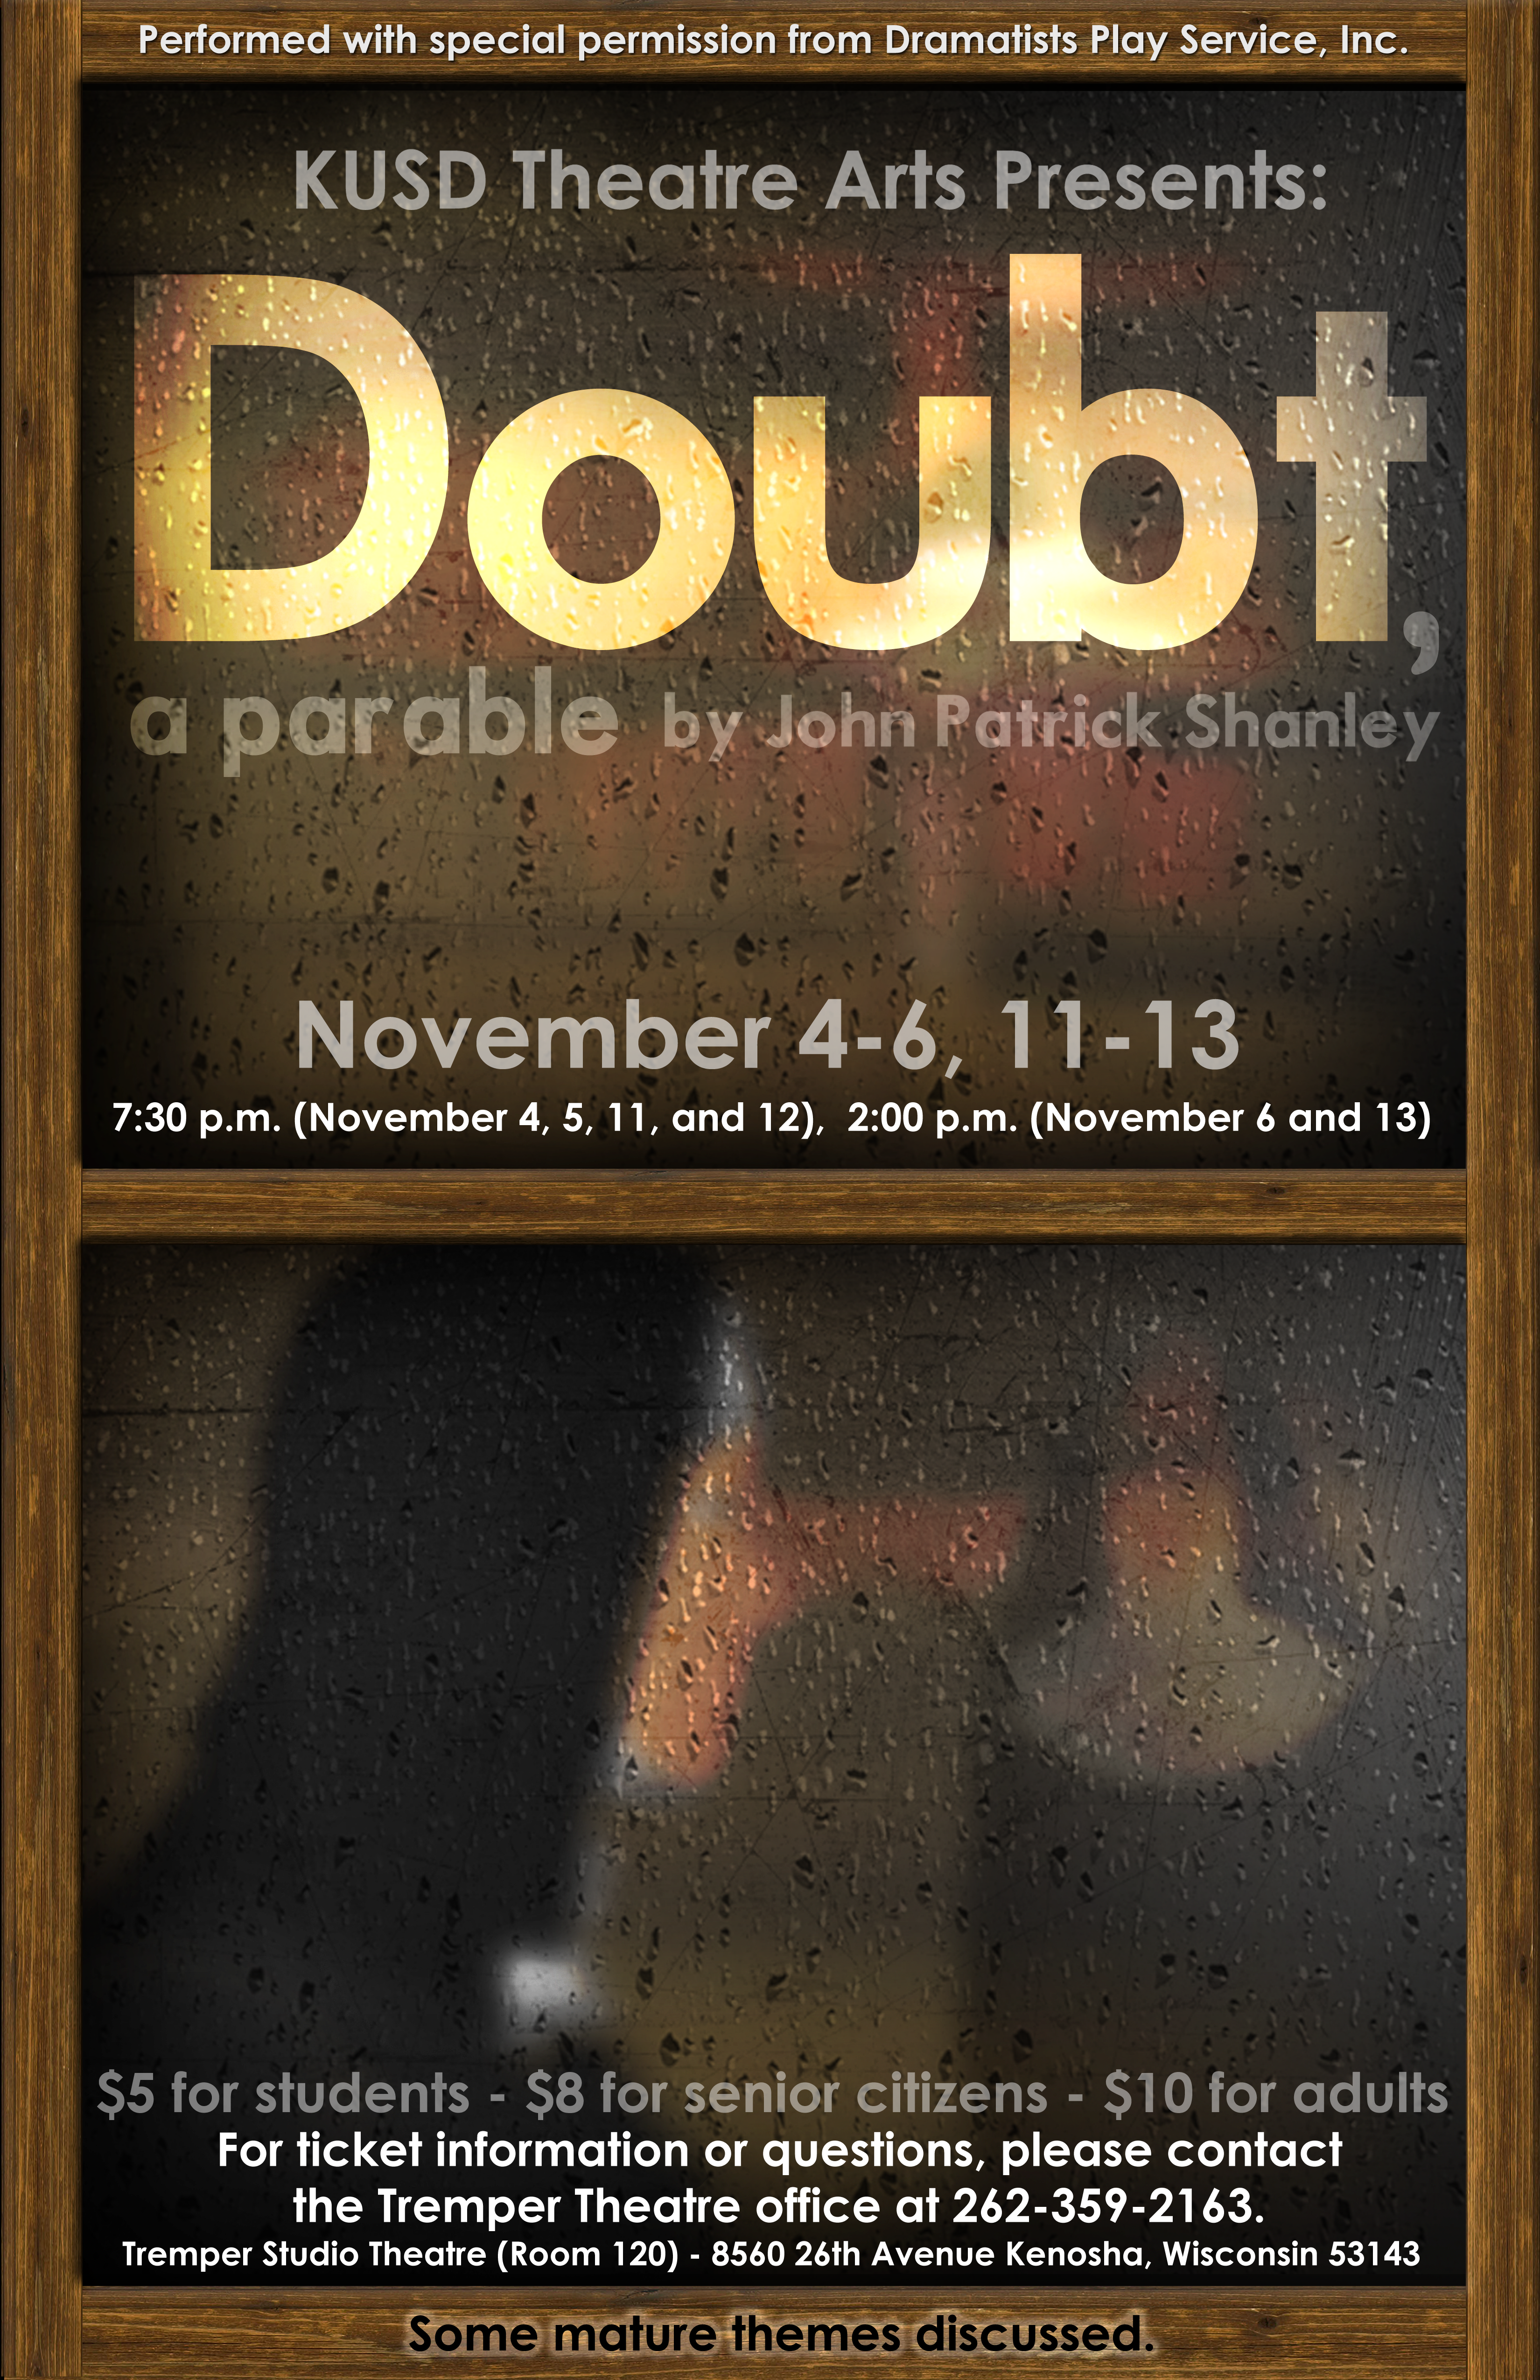 The poster for Doubt, a parable